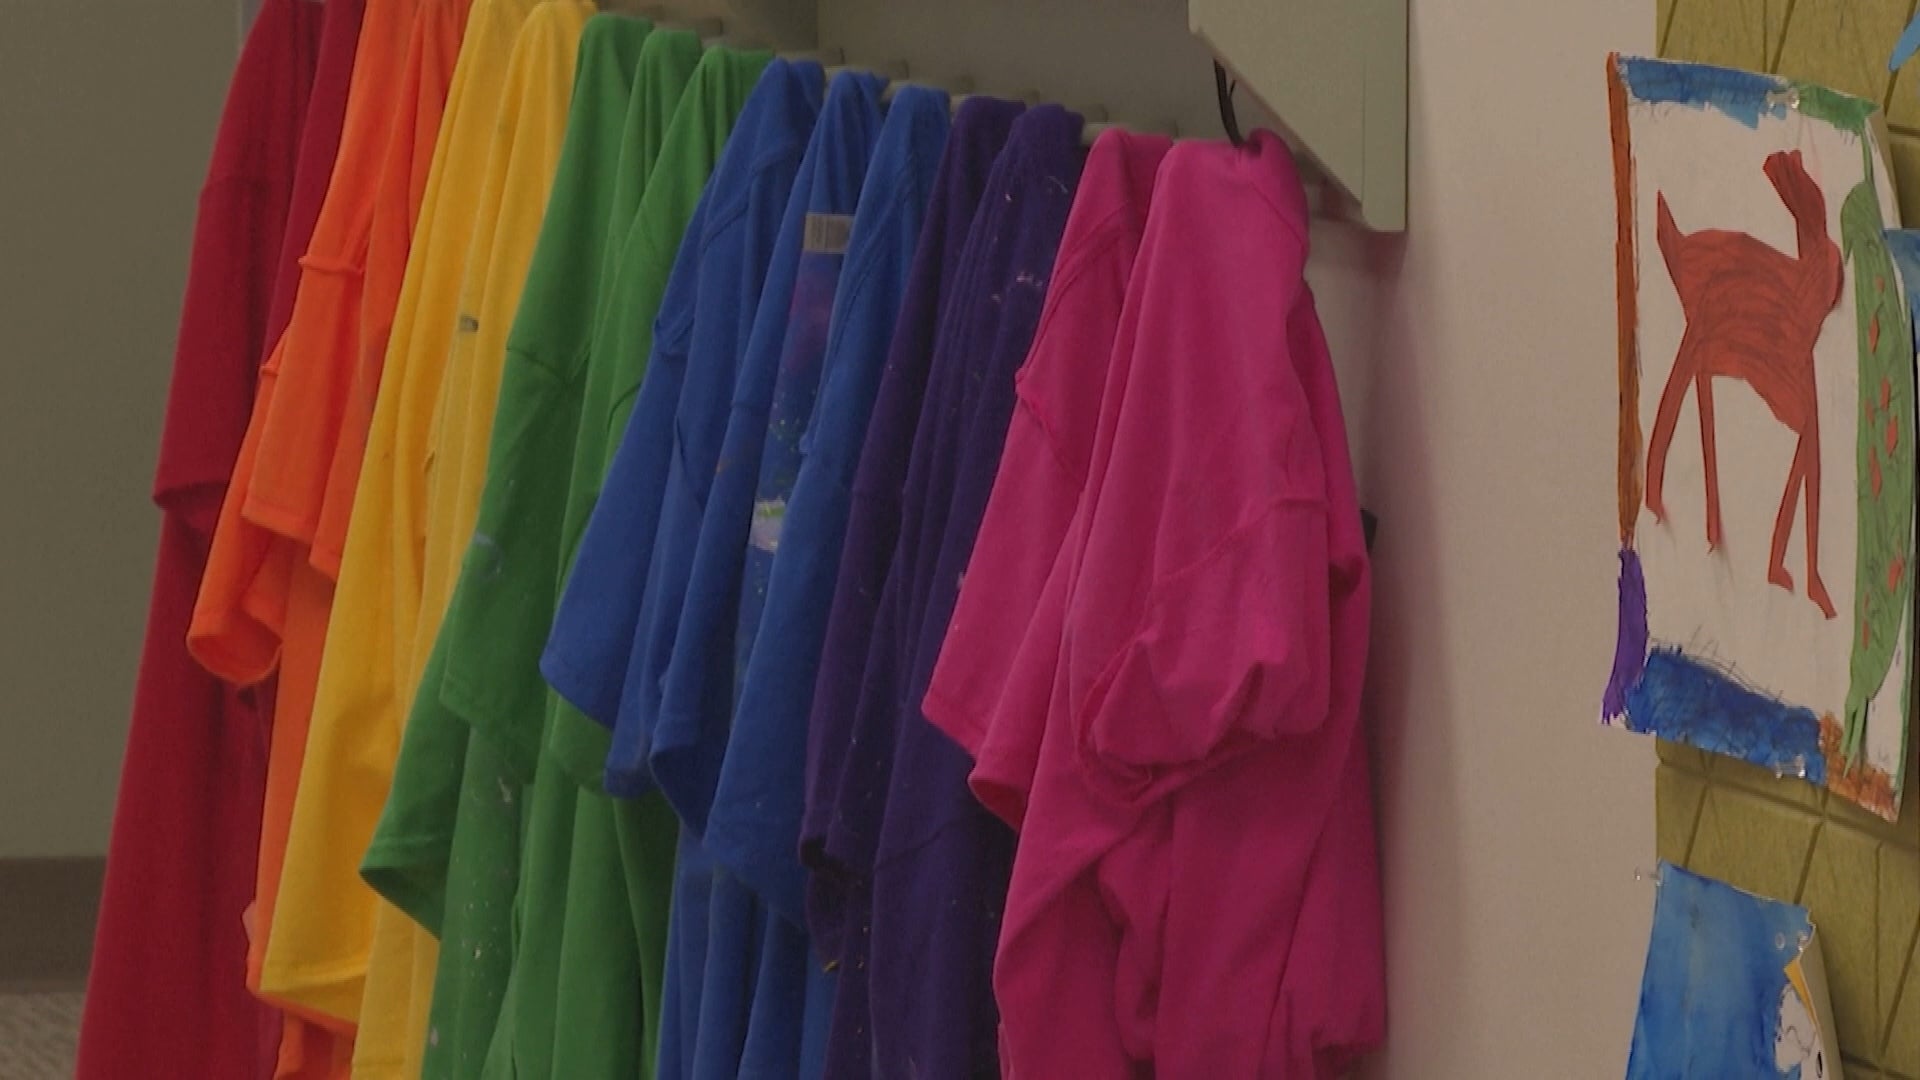 Shirts hanging in rainbow formation.